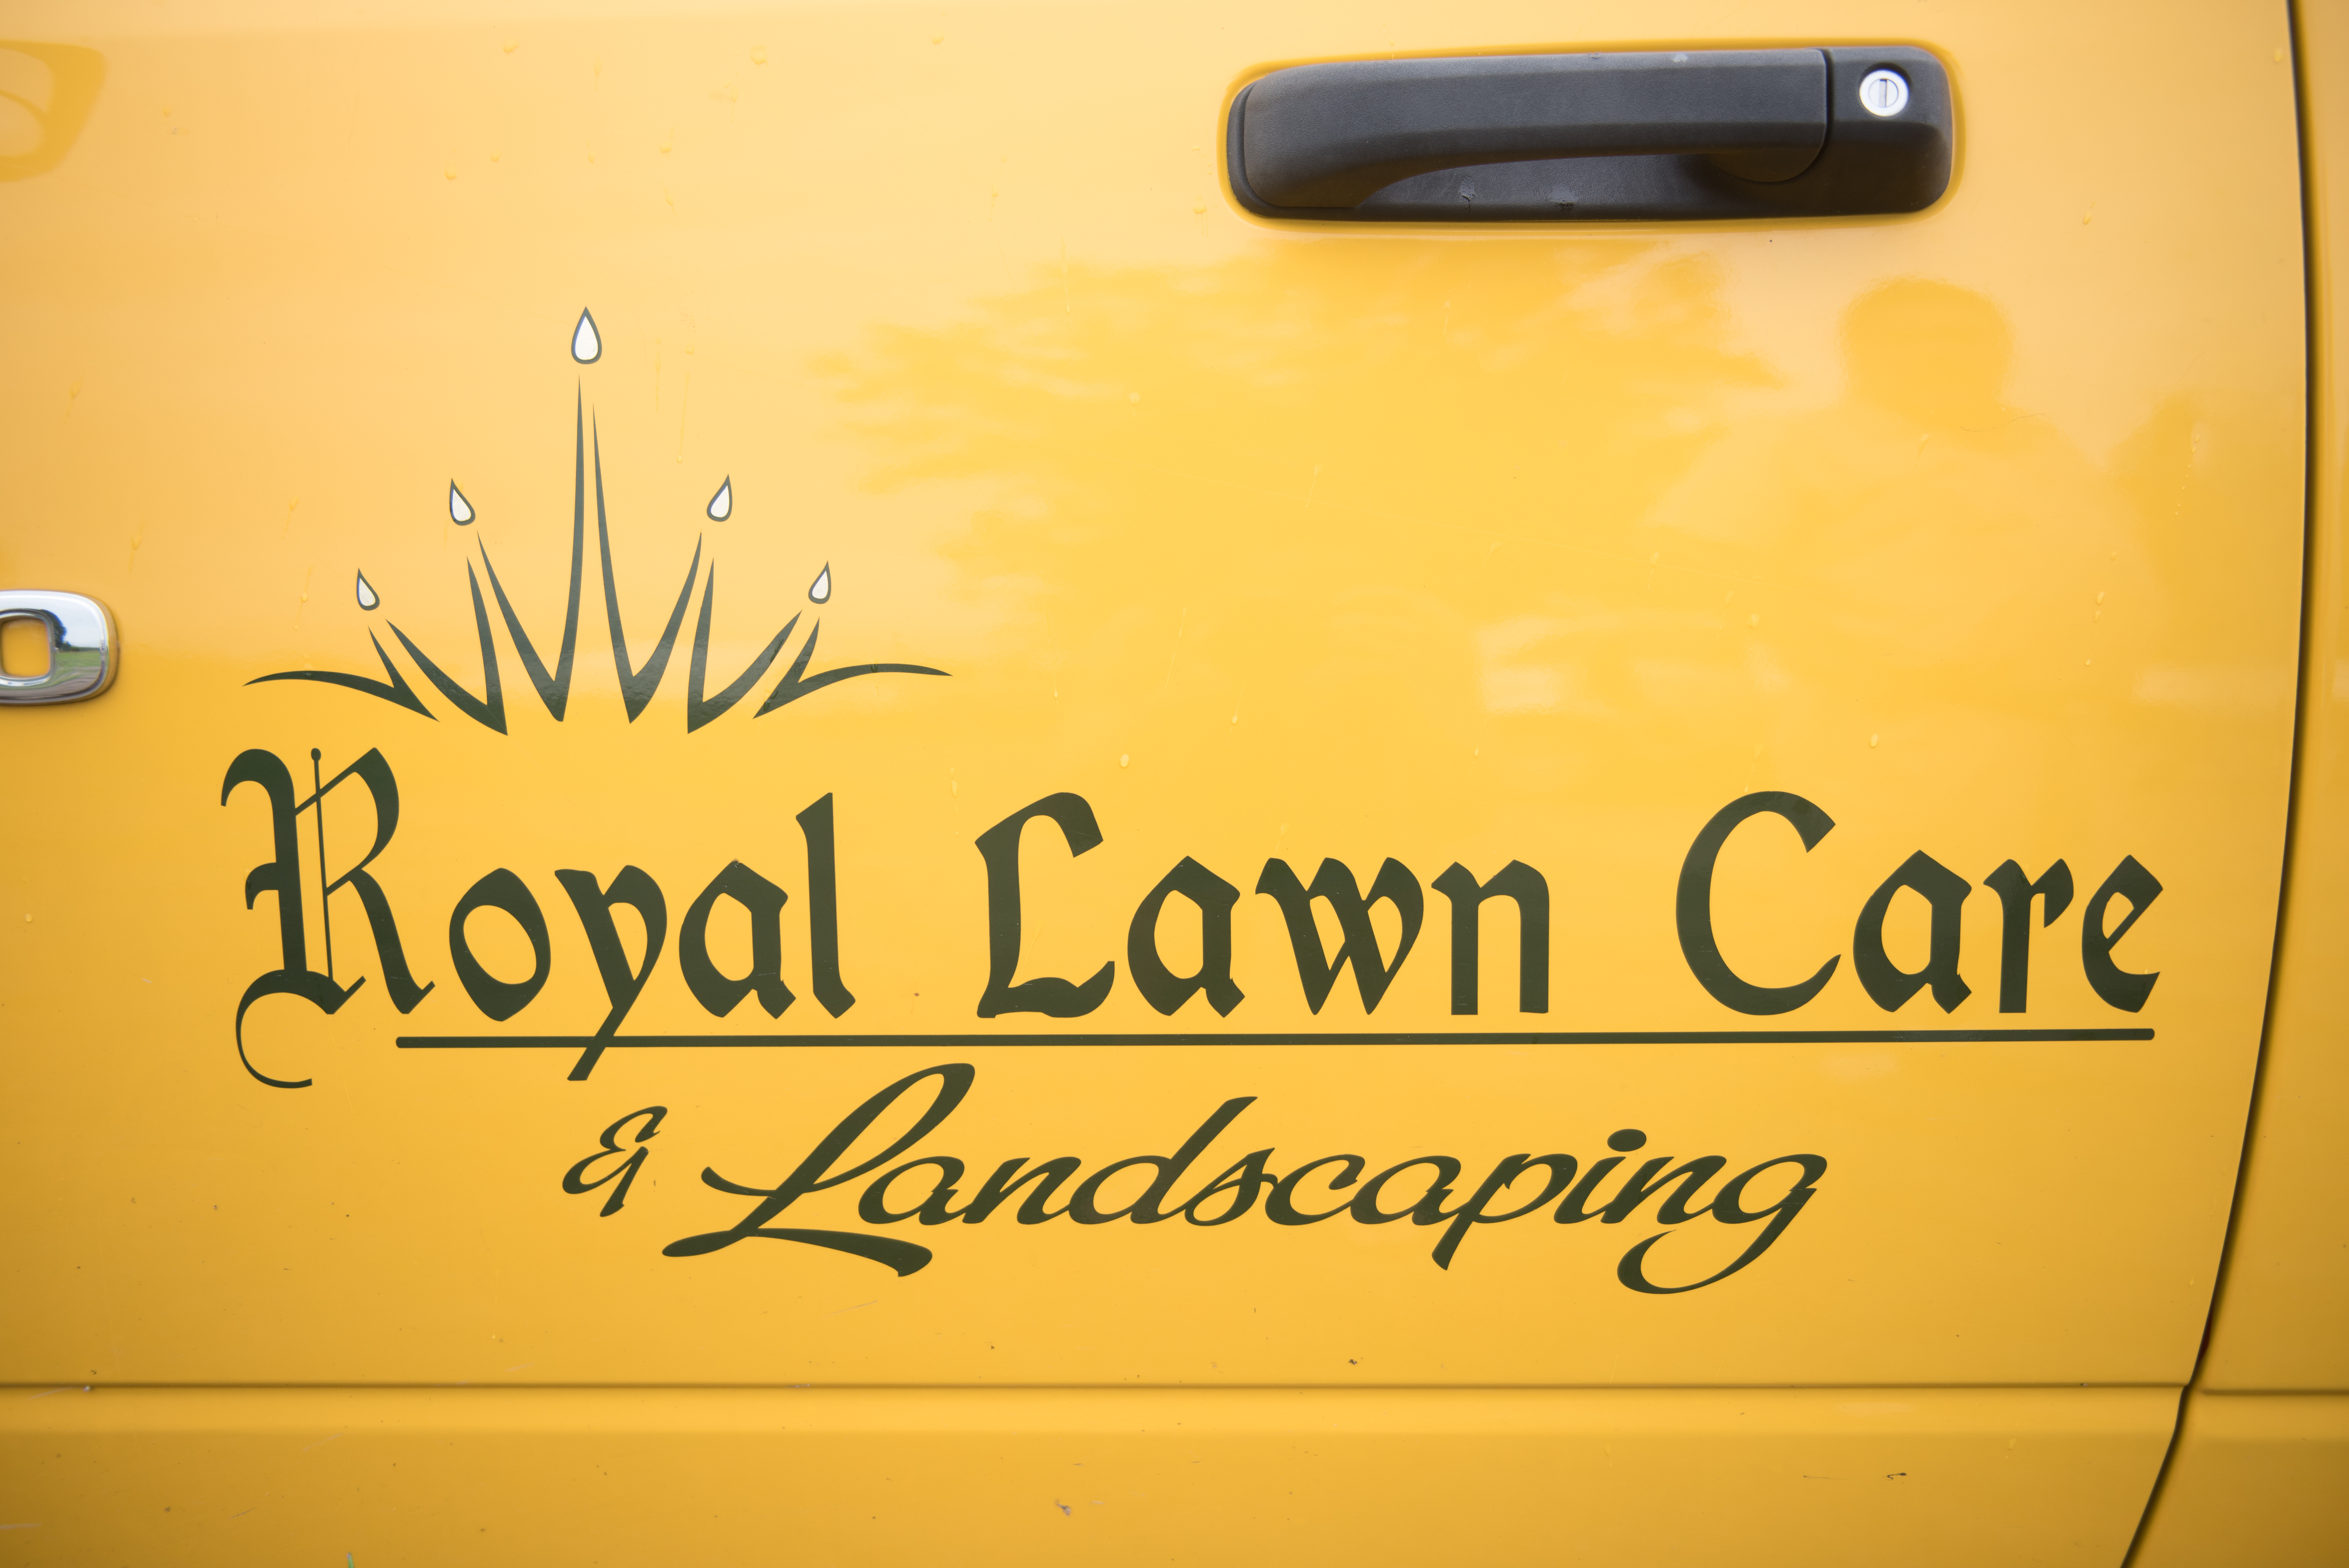 A logo for Royal Lawn Care on the side of a truck